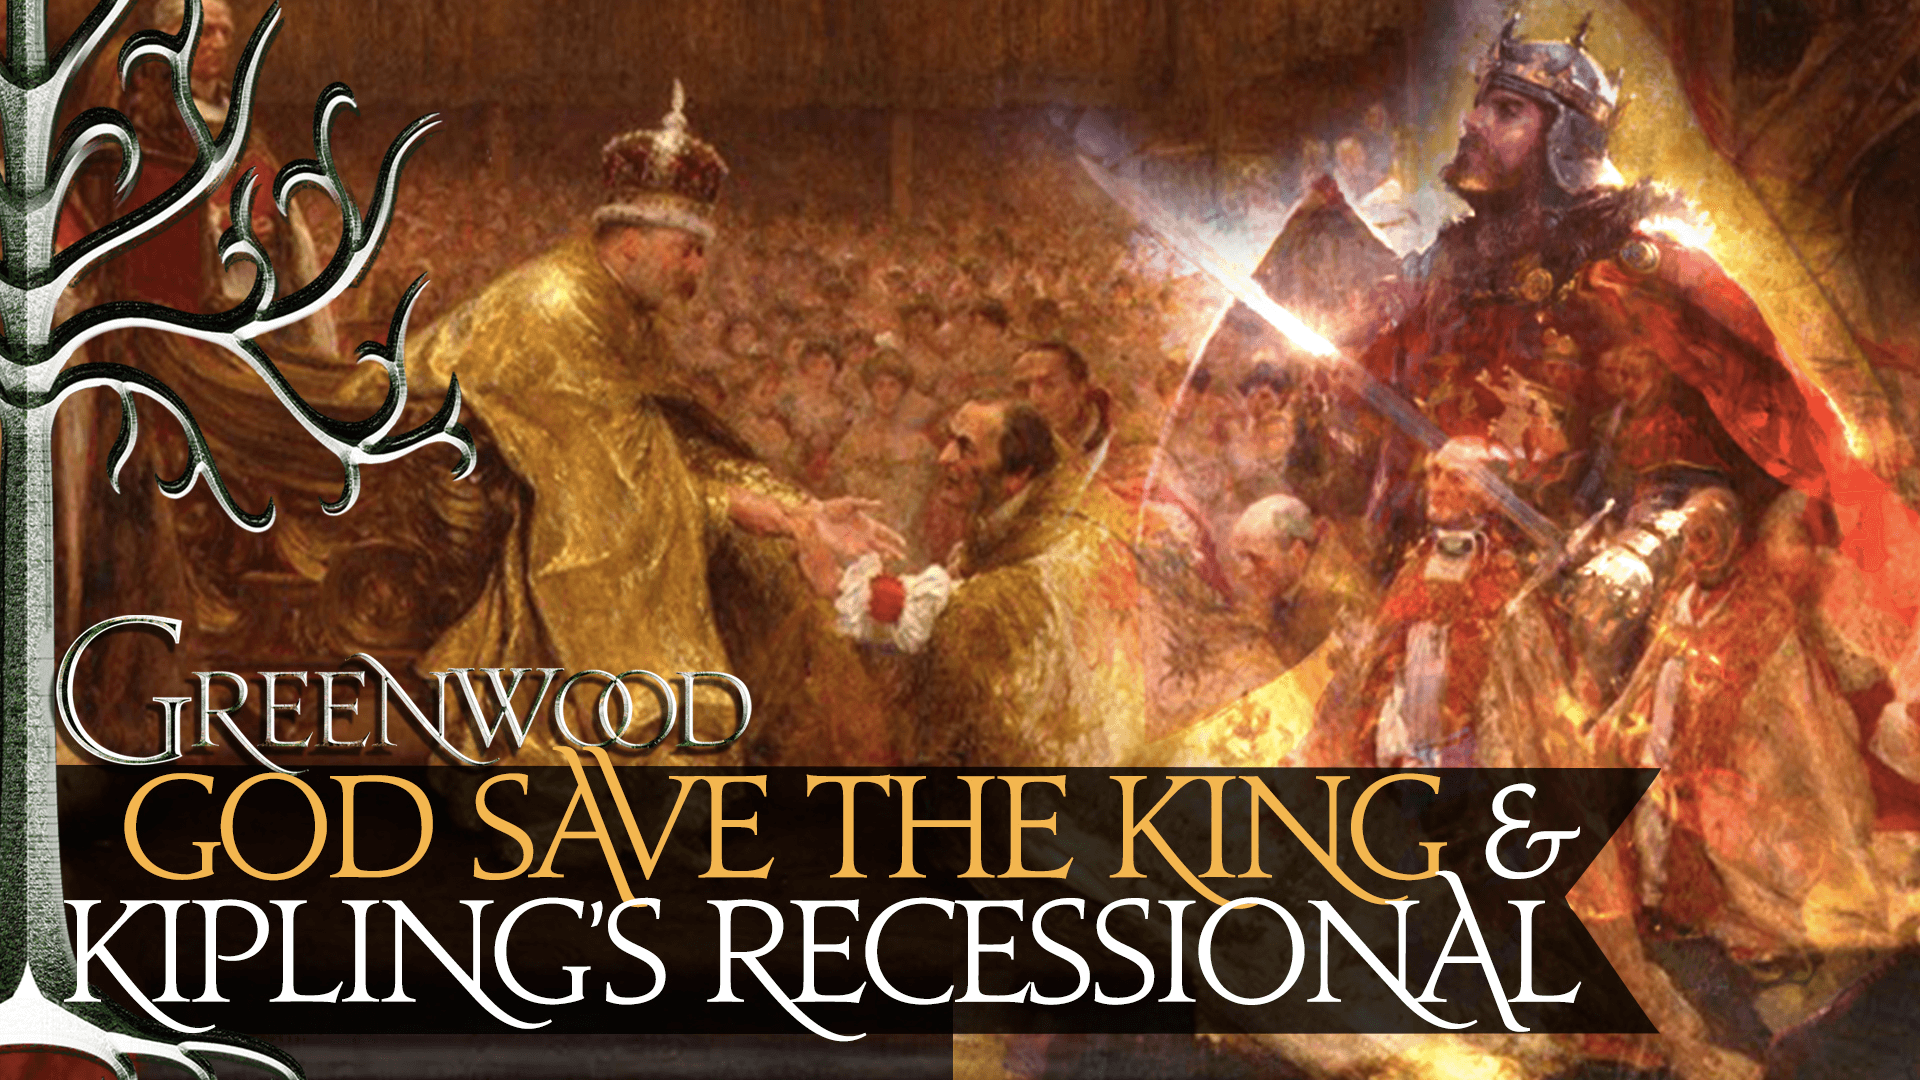 Greenwood episode cover art: The TRUE meaning of God Save the King